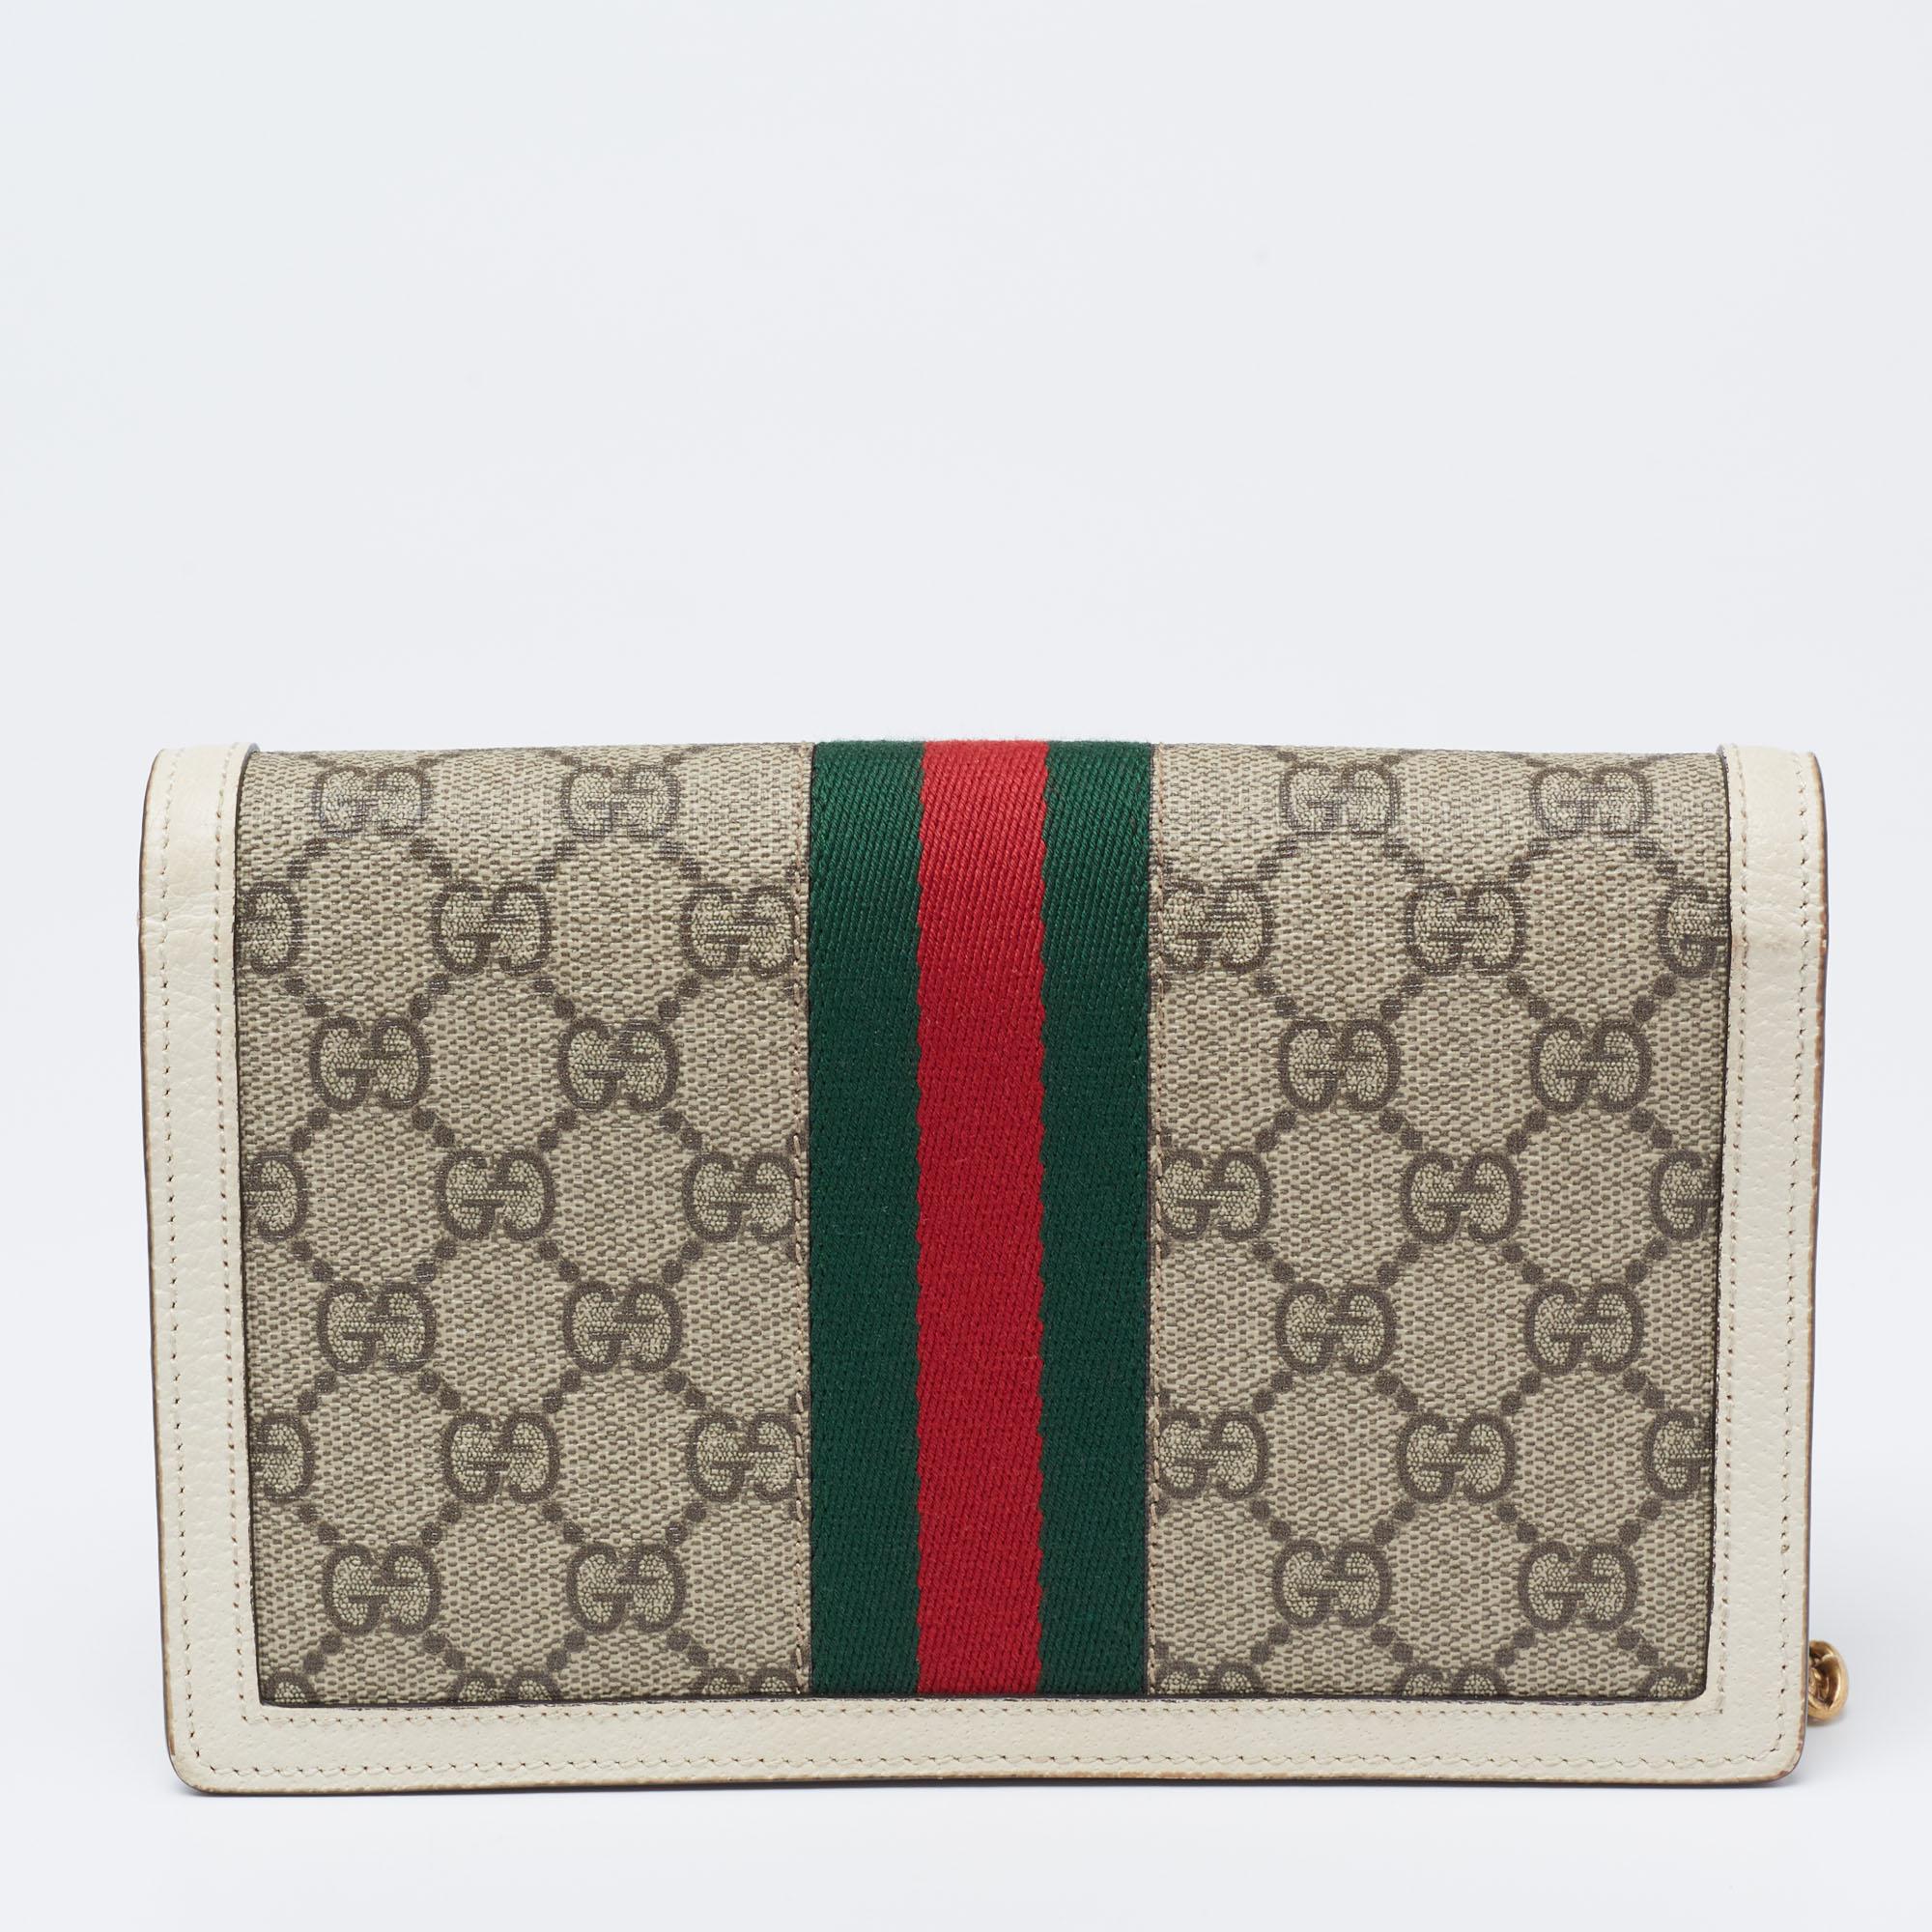 Get the assurance of quality and style that never fades with this Gucci Queen Margaret Wallet On Chain. It is sewn using GG Supreme canvas as well as leather and the interior has a wallet-like layout with space for cards, cash, and coins. The